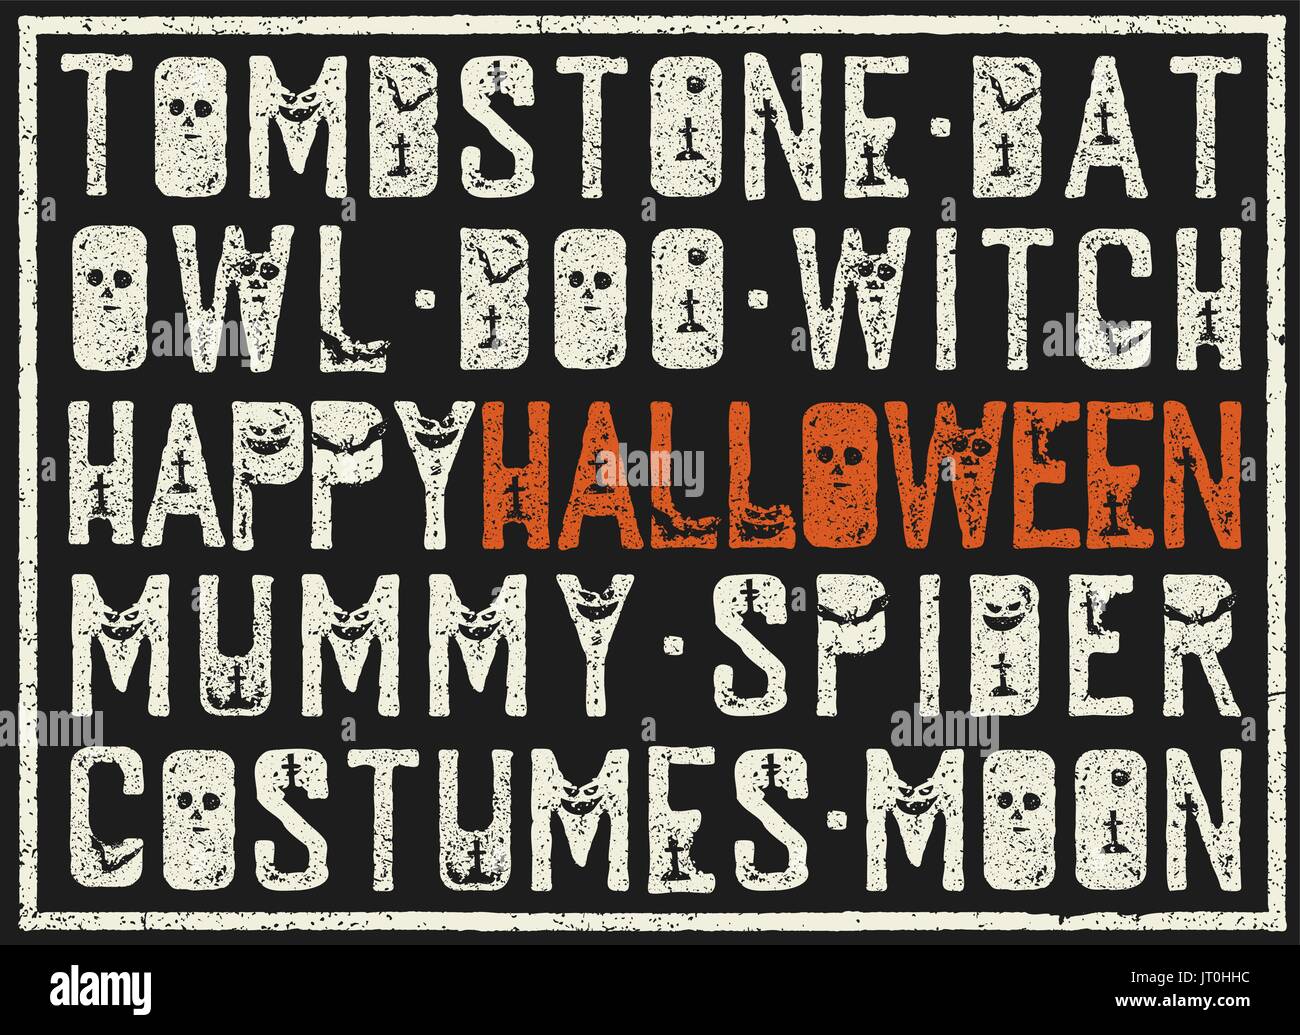 Halloween words decorative poster. Grunge stamp letters with scary elements (bats, tombs, pumpkins). Holiday words in grunge frame. Stock Vector